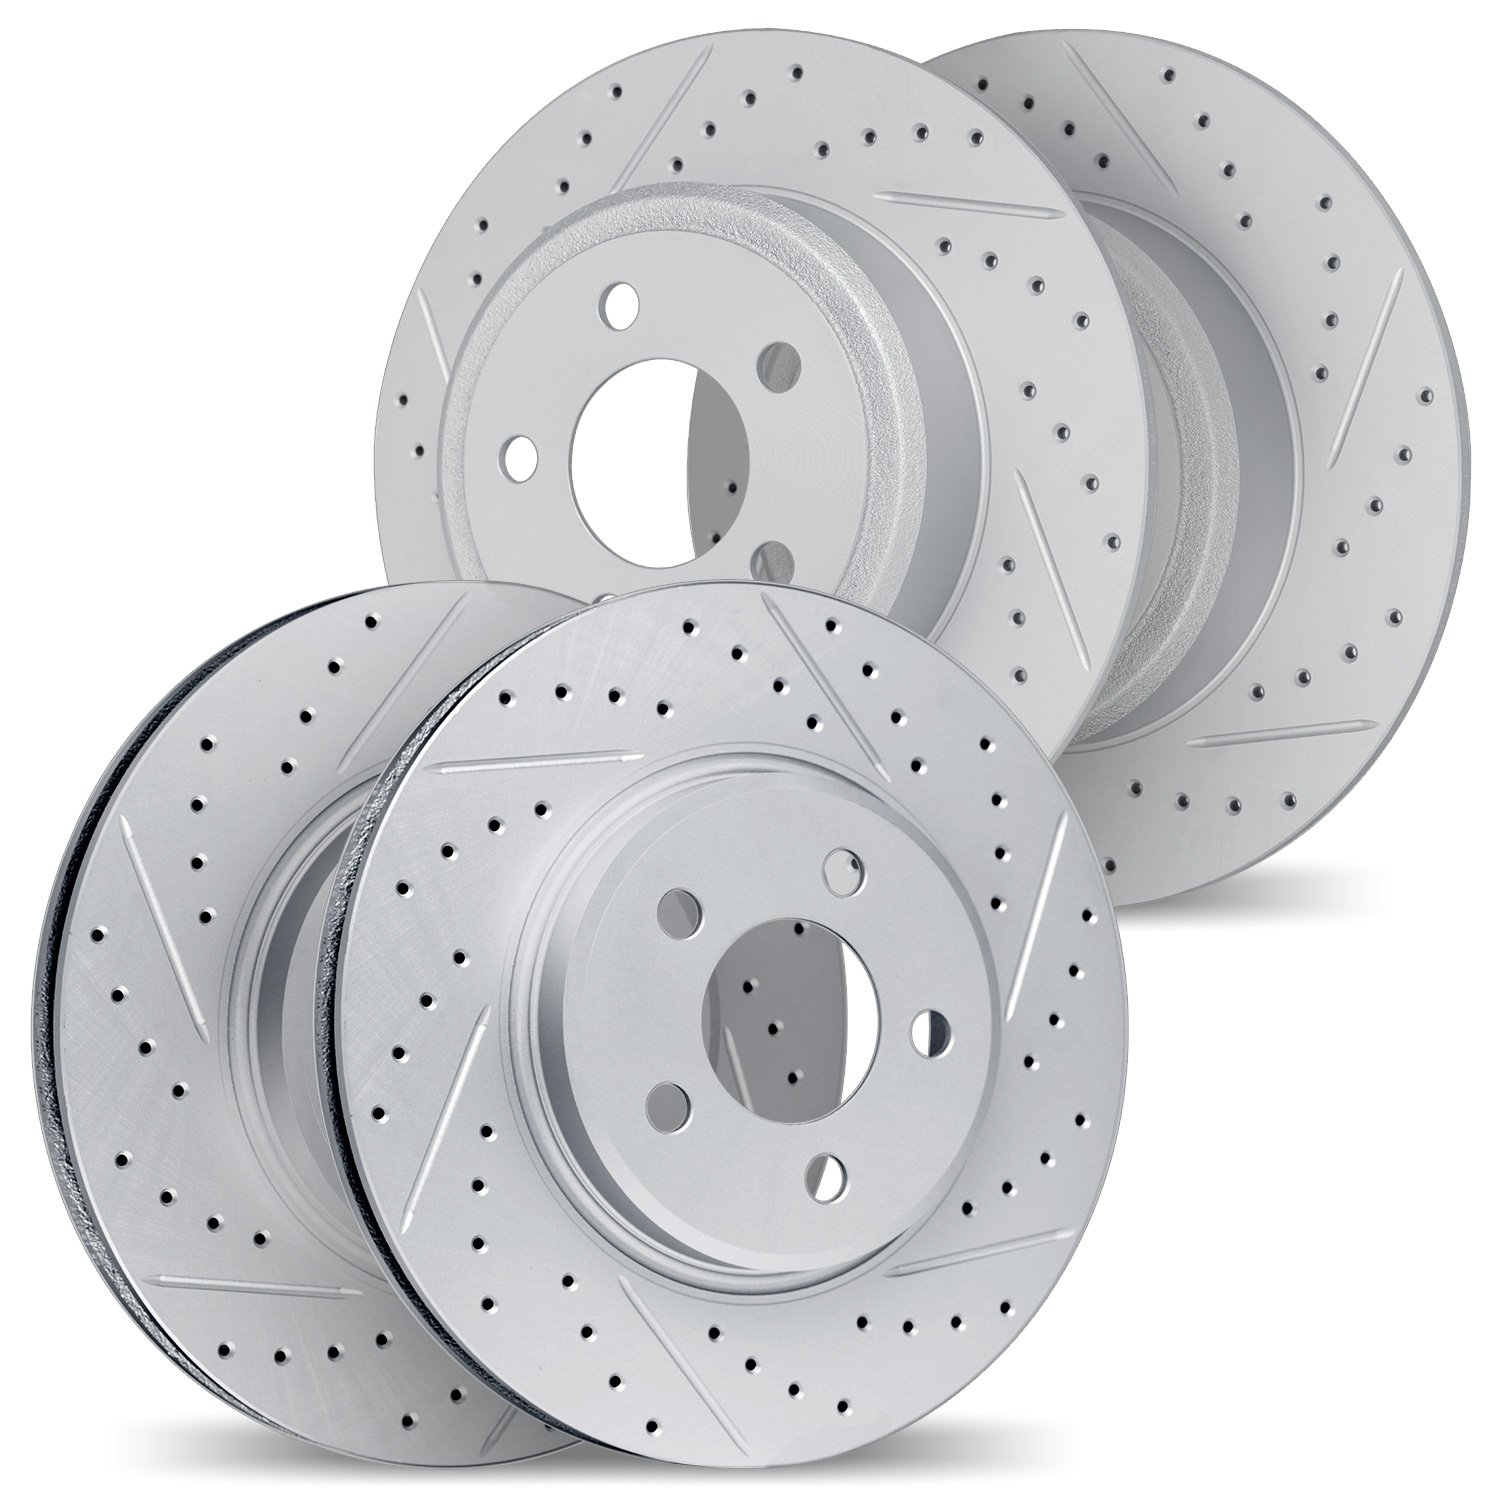 2004-63041 Geoperformance Drilled/Slotted Brake Rotors, 2012-2018 Mercedes-Benz, Position: Front and Rear